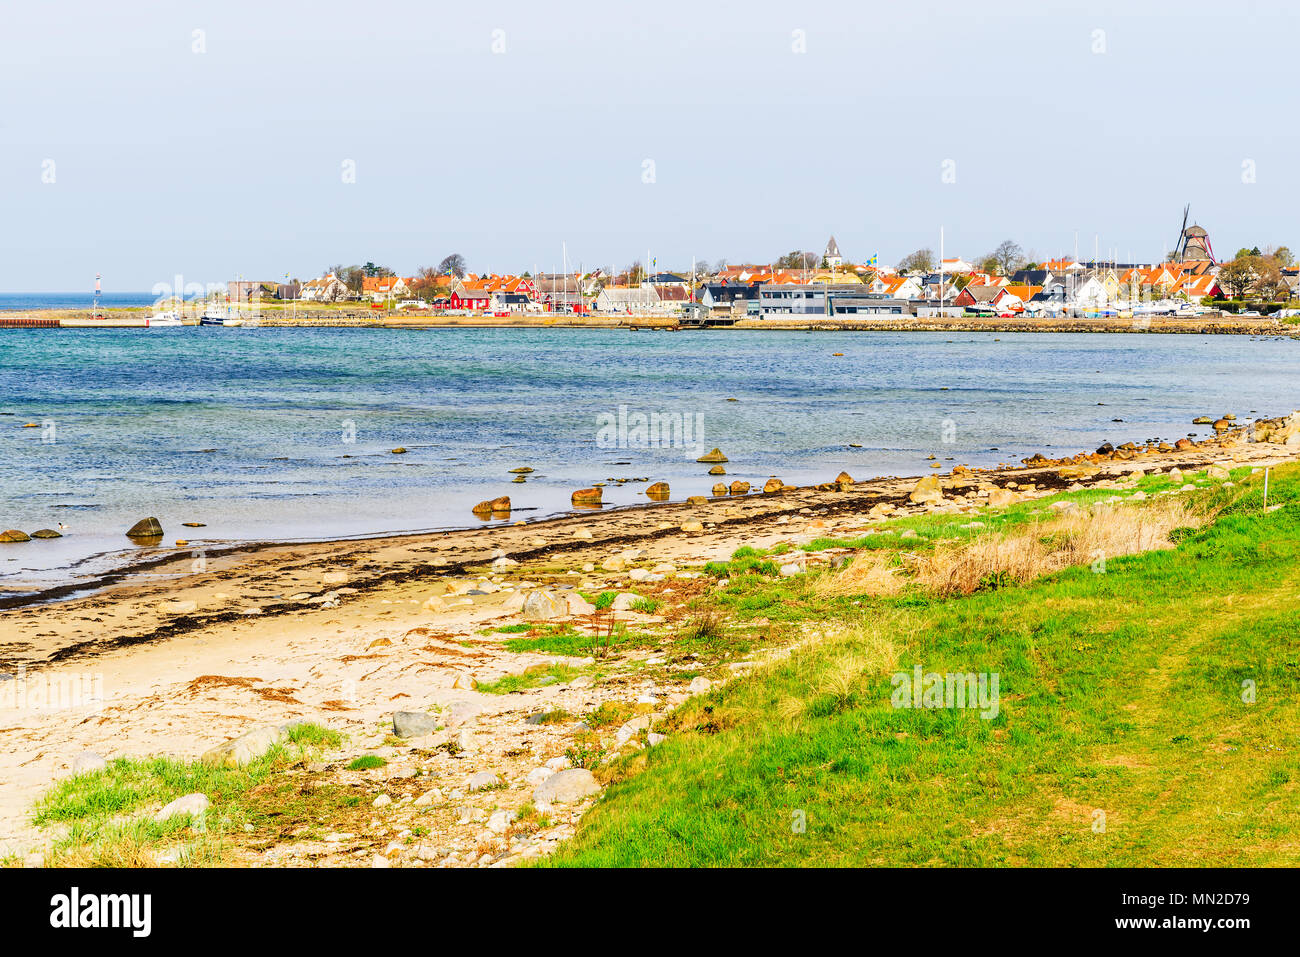 Viken, Sweden - April 30, 2018: Documentary of everyday life and place. The seaside village Viken seen from across the bay to the south on a sunny and Stock Photo